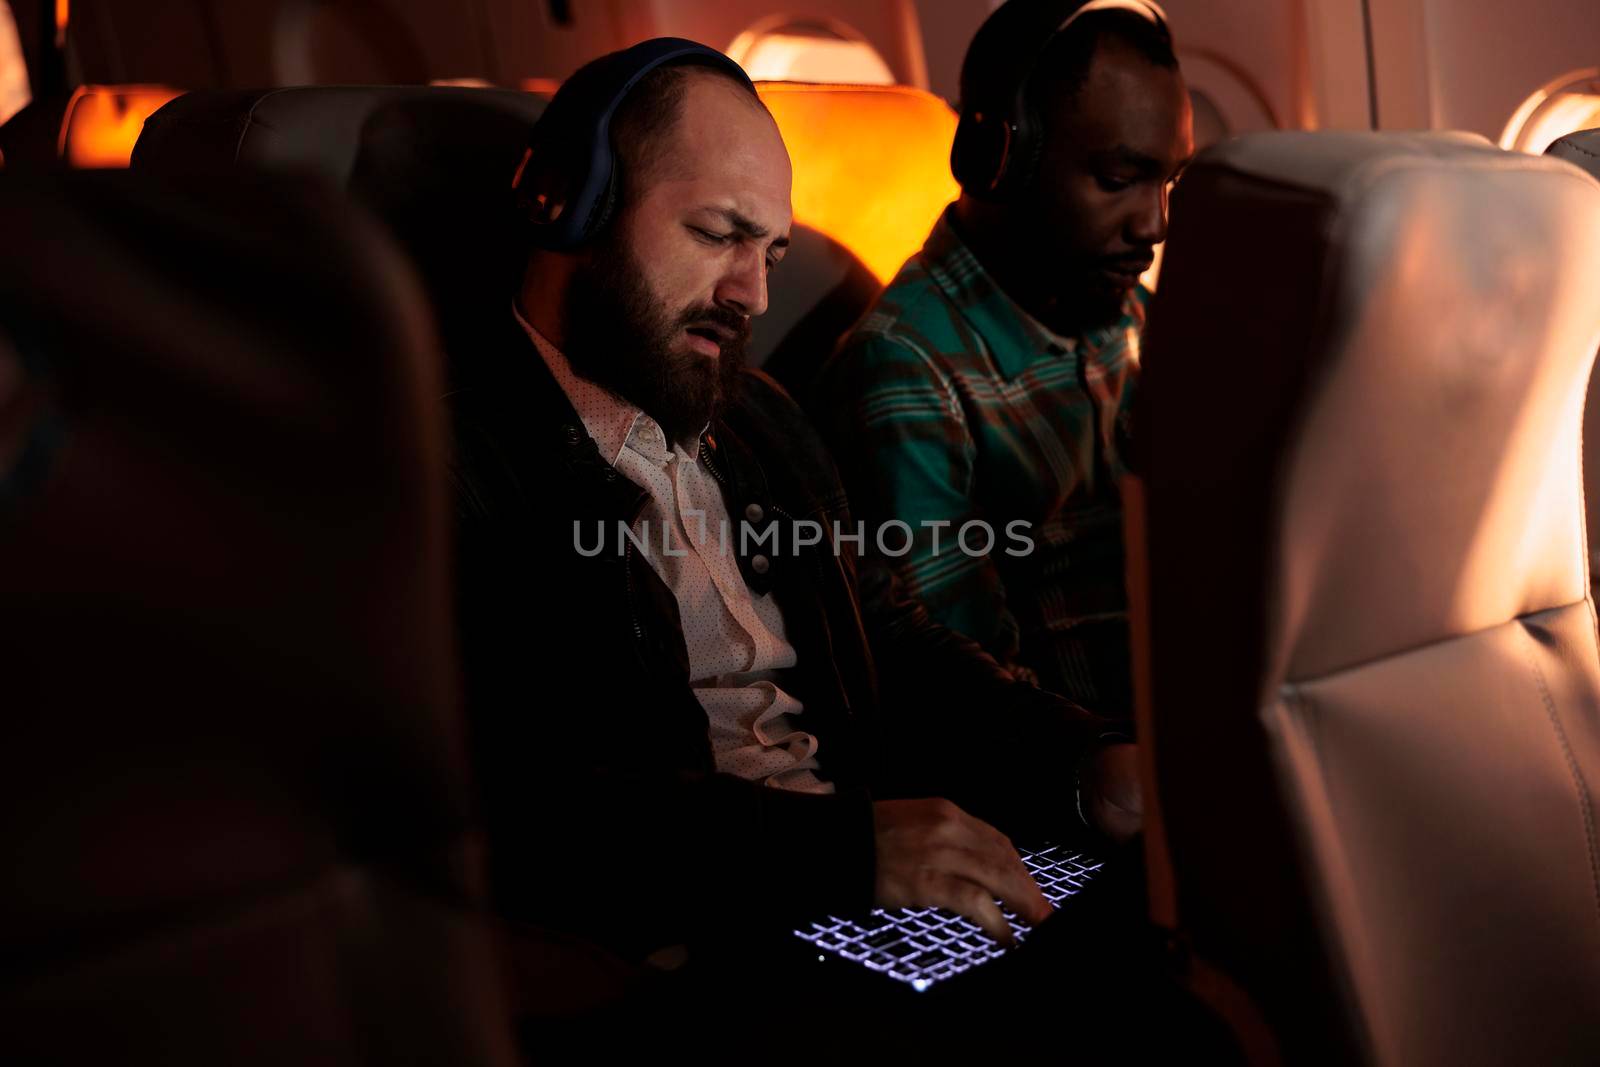 Multiethnic tourists sitting in airplane on commercial flight to travel on work trip or holiday vacation with international airways service. Passengers flying in economy class for transportation.